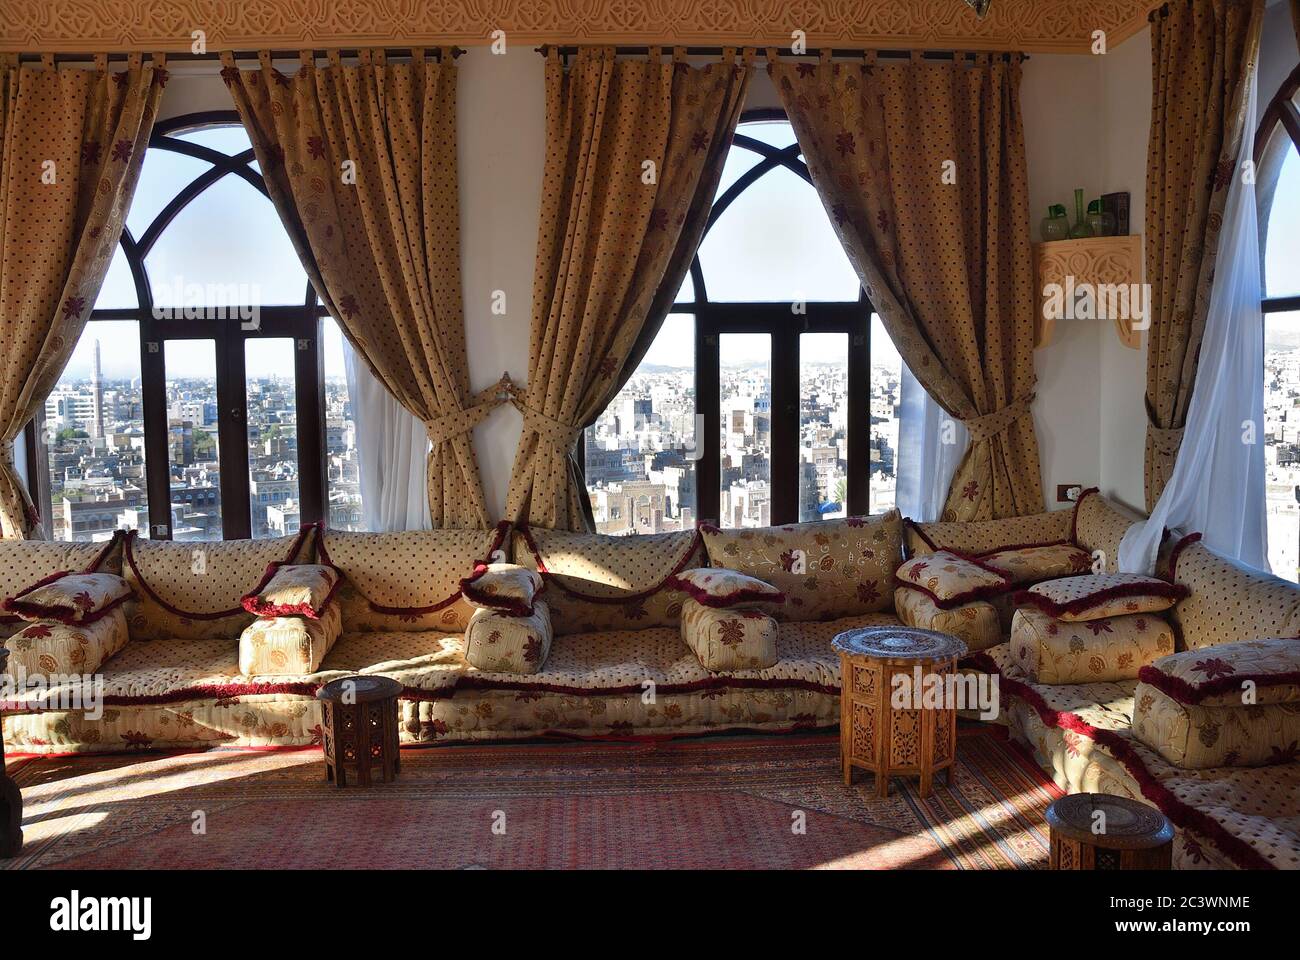 Sanaa, Yemen - March 12, 2010: Interiors of relaxation room in Sanaa hotel. This room used for for smoking hookah and chewing qat Stock Photo